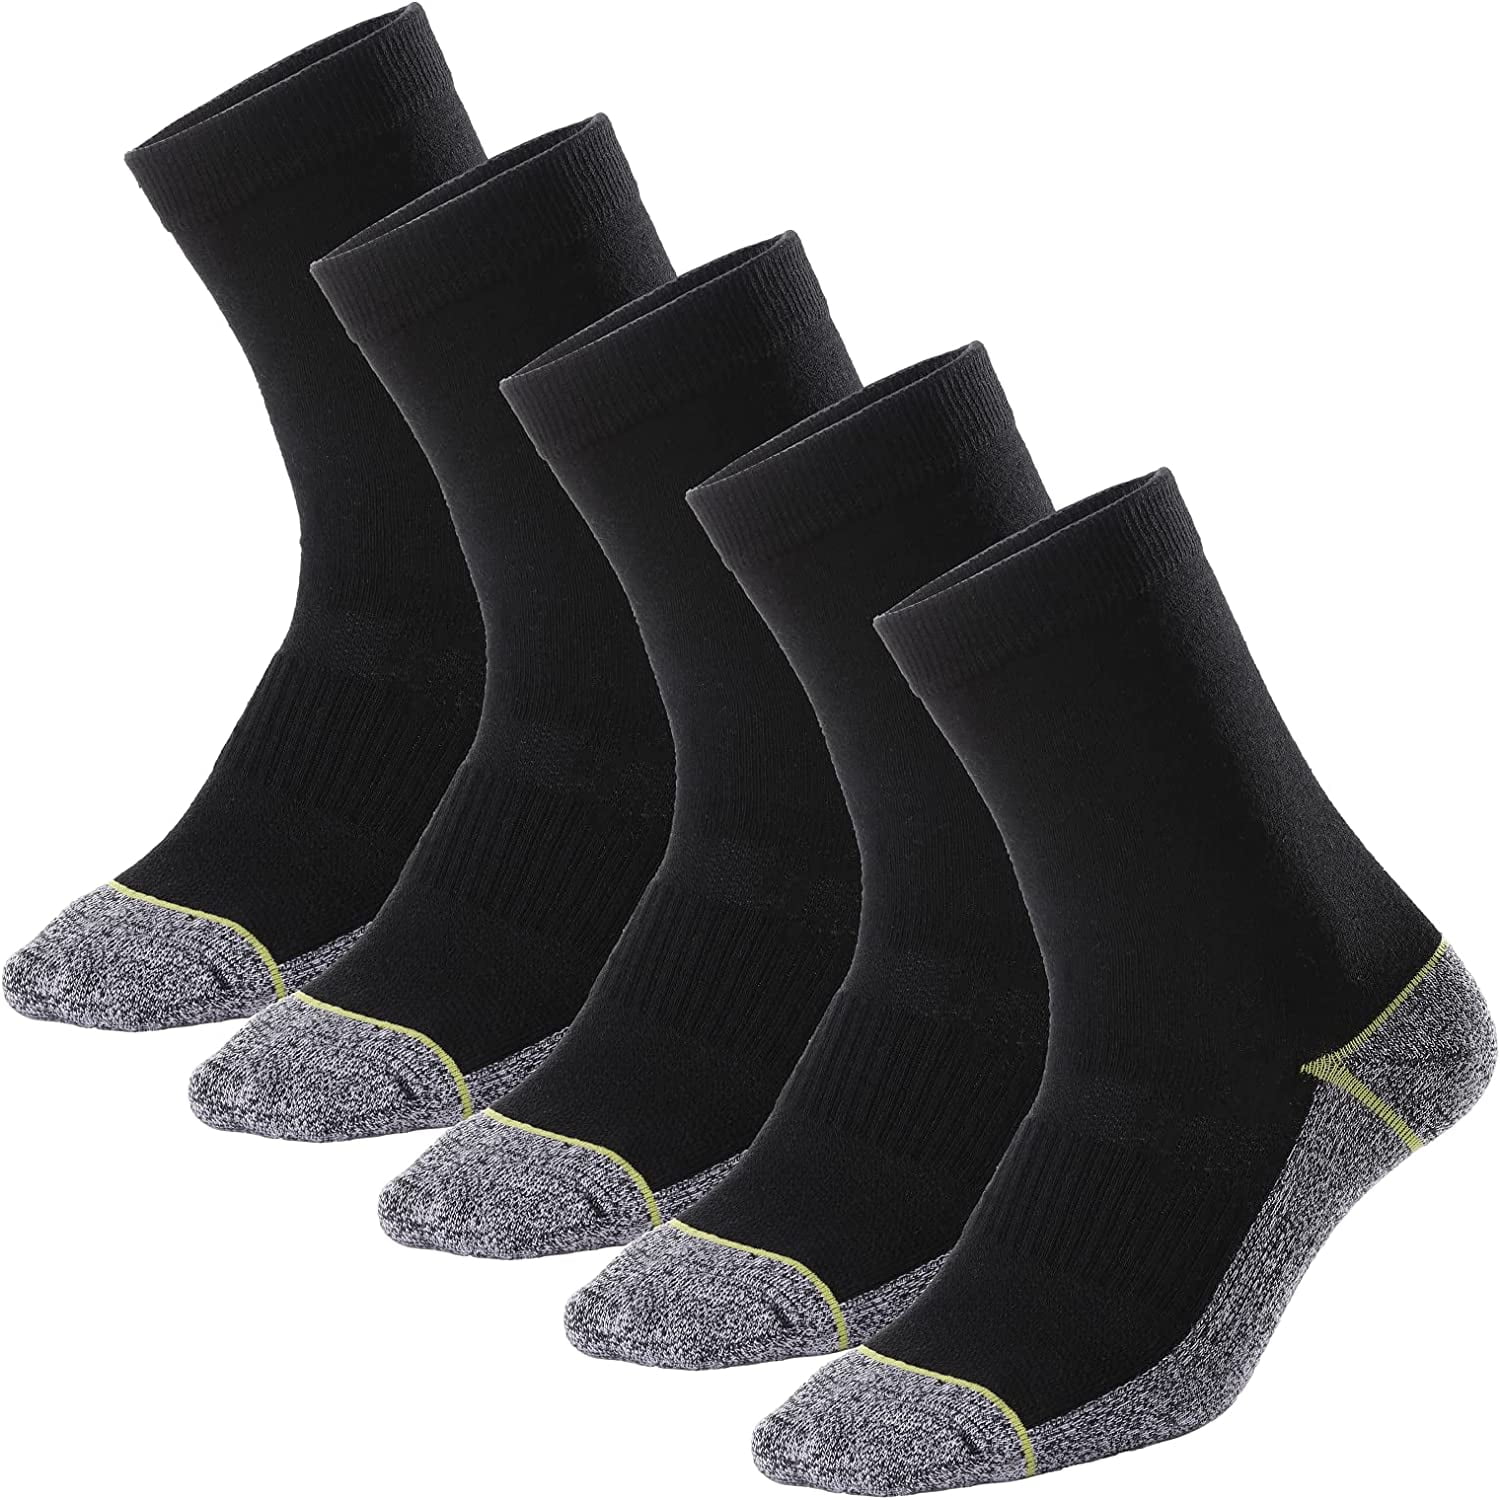 Kodal Copper Infused Crew Socks Business Athletic Moisture Wicking Odor  Free Comfortable for All Day Wear (4/5 Pairs) - Walmart.com